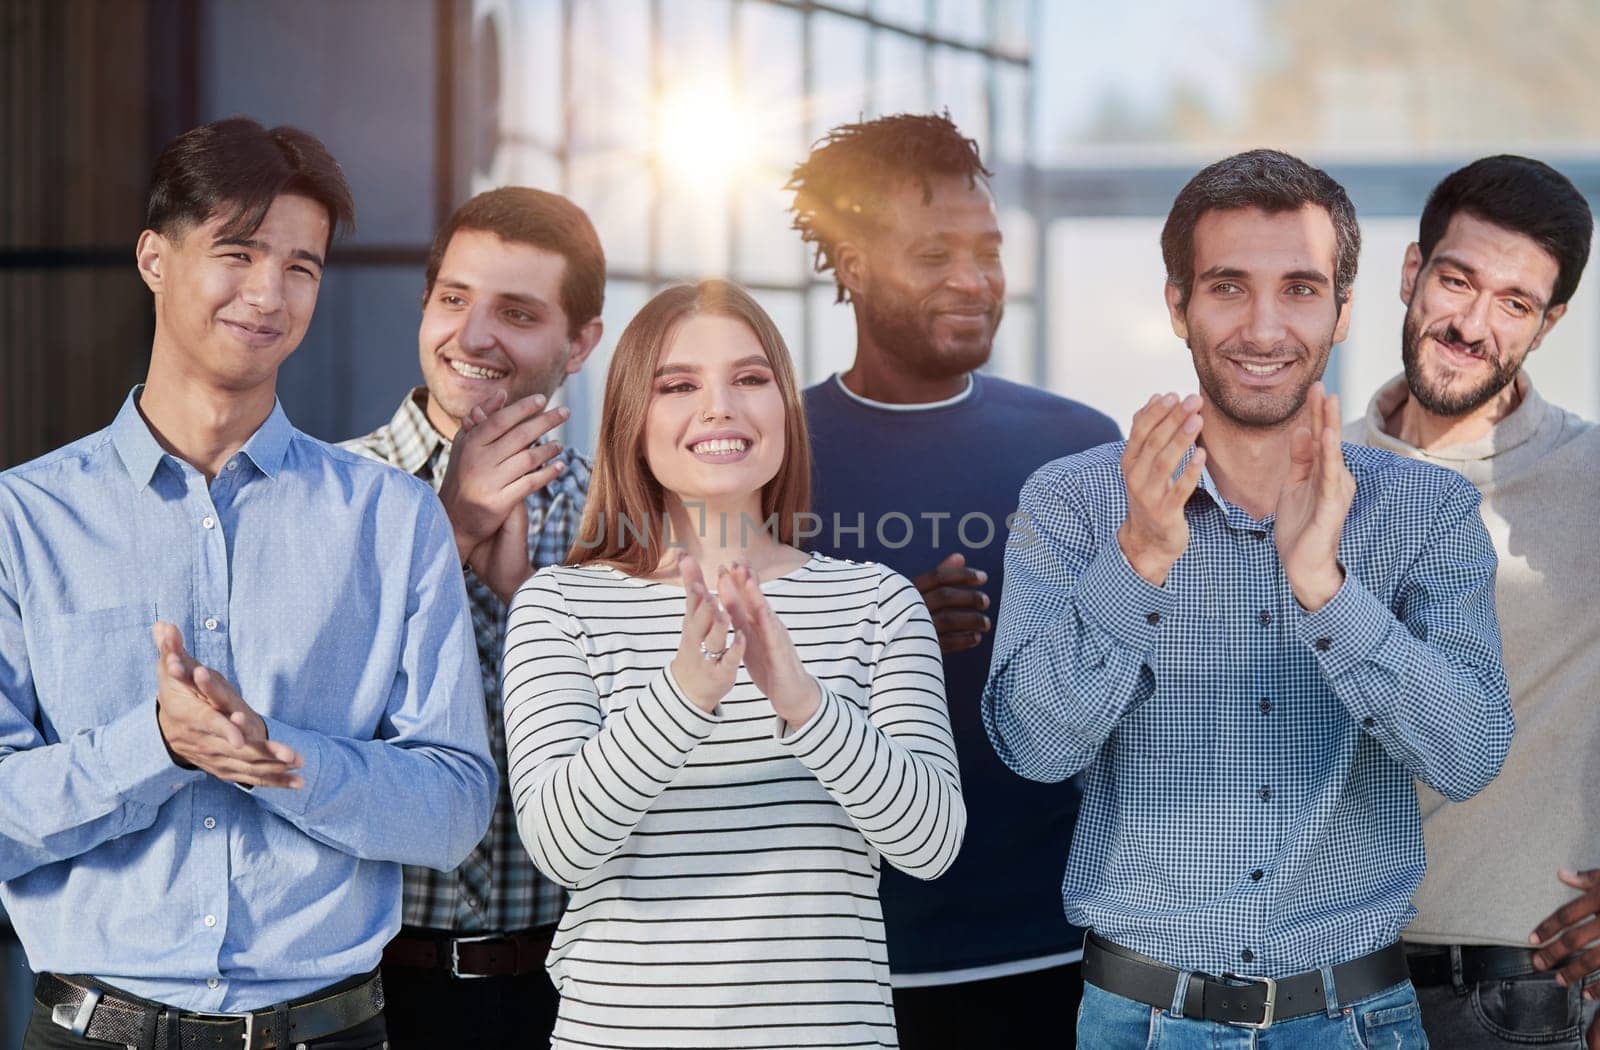 Human resources. Group portrait of smiling employees of a friendly team of different racial genders standing together in an office. by Prosto